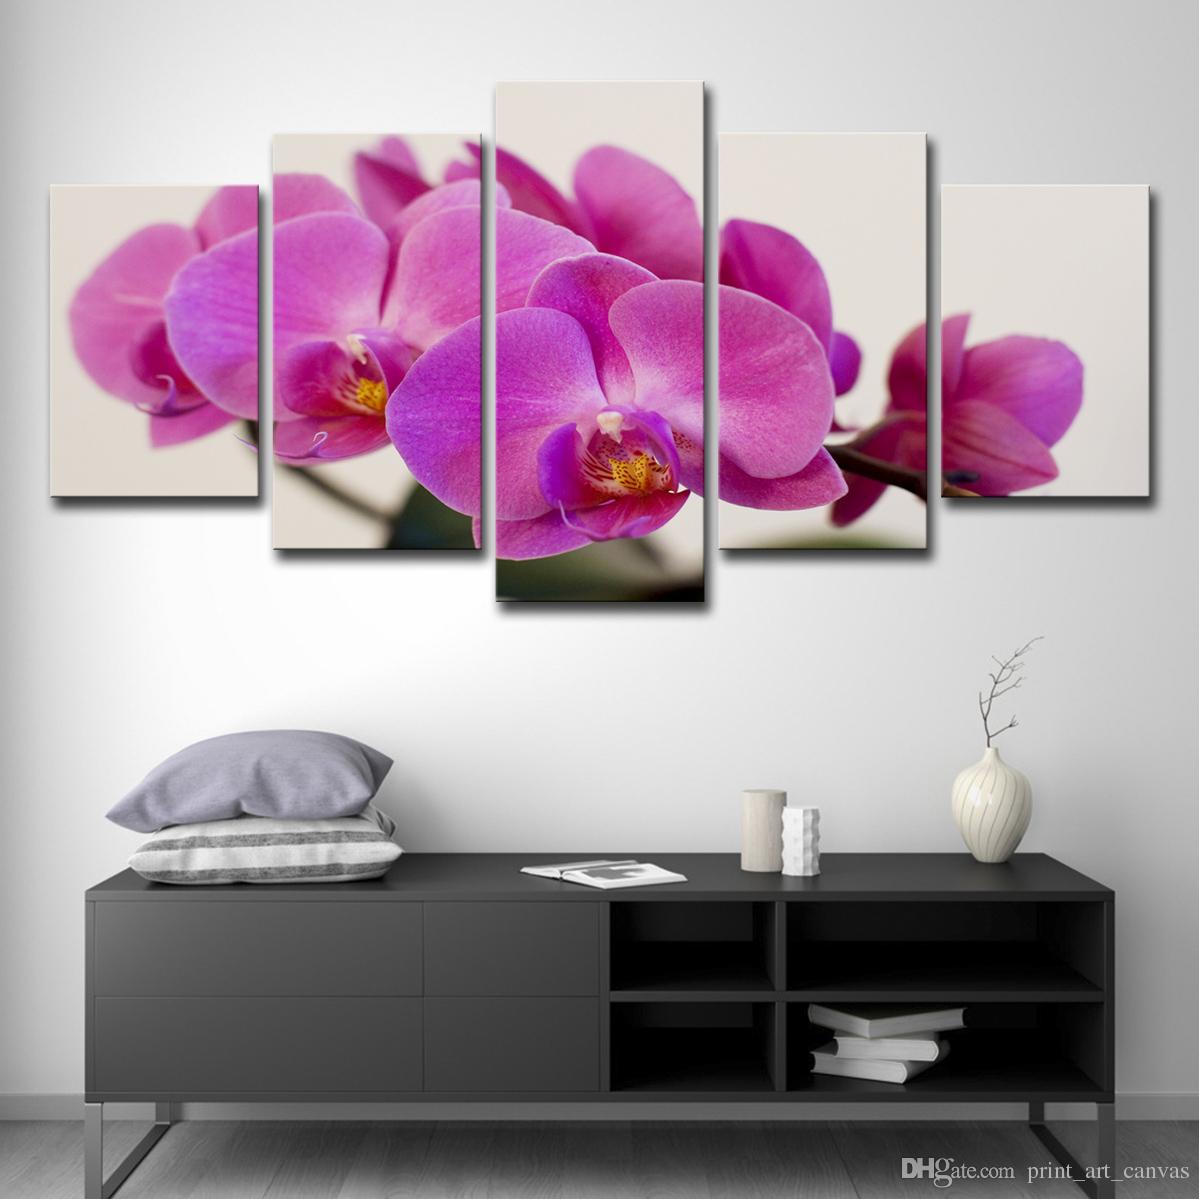 Canvas HD Prints Poster Living Room Home Decor 5 Pieces Purple Moth Orchid Paintings Modern Wall Art Flowers Pictures